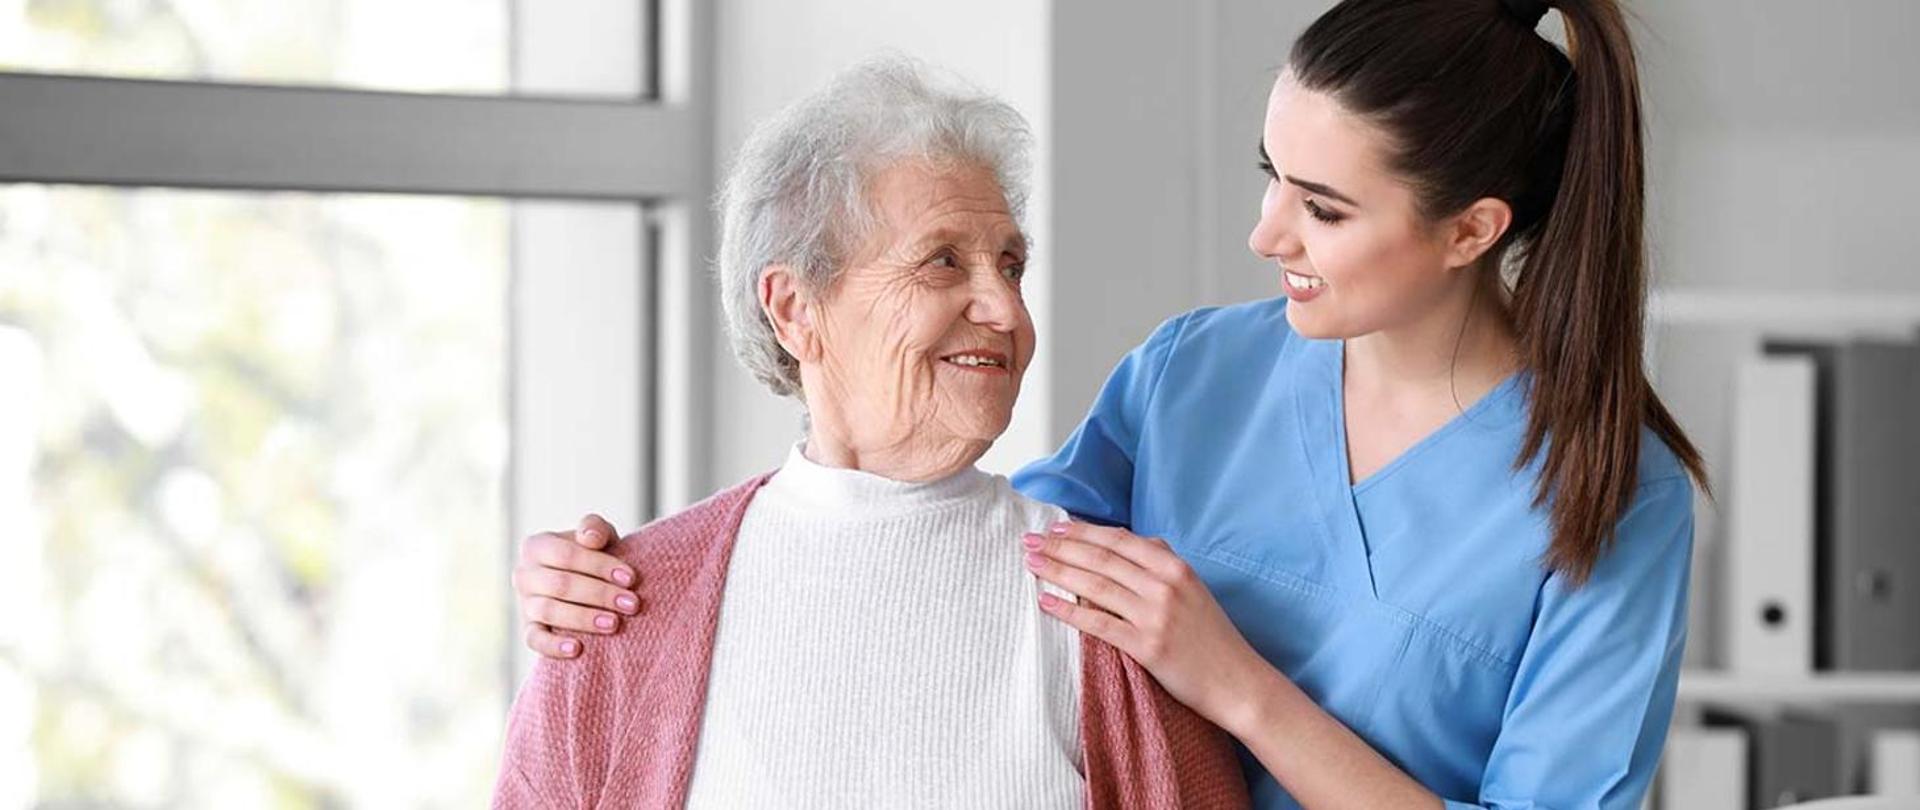 The programme for the development of family nursing homes is being launched